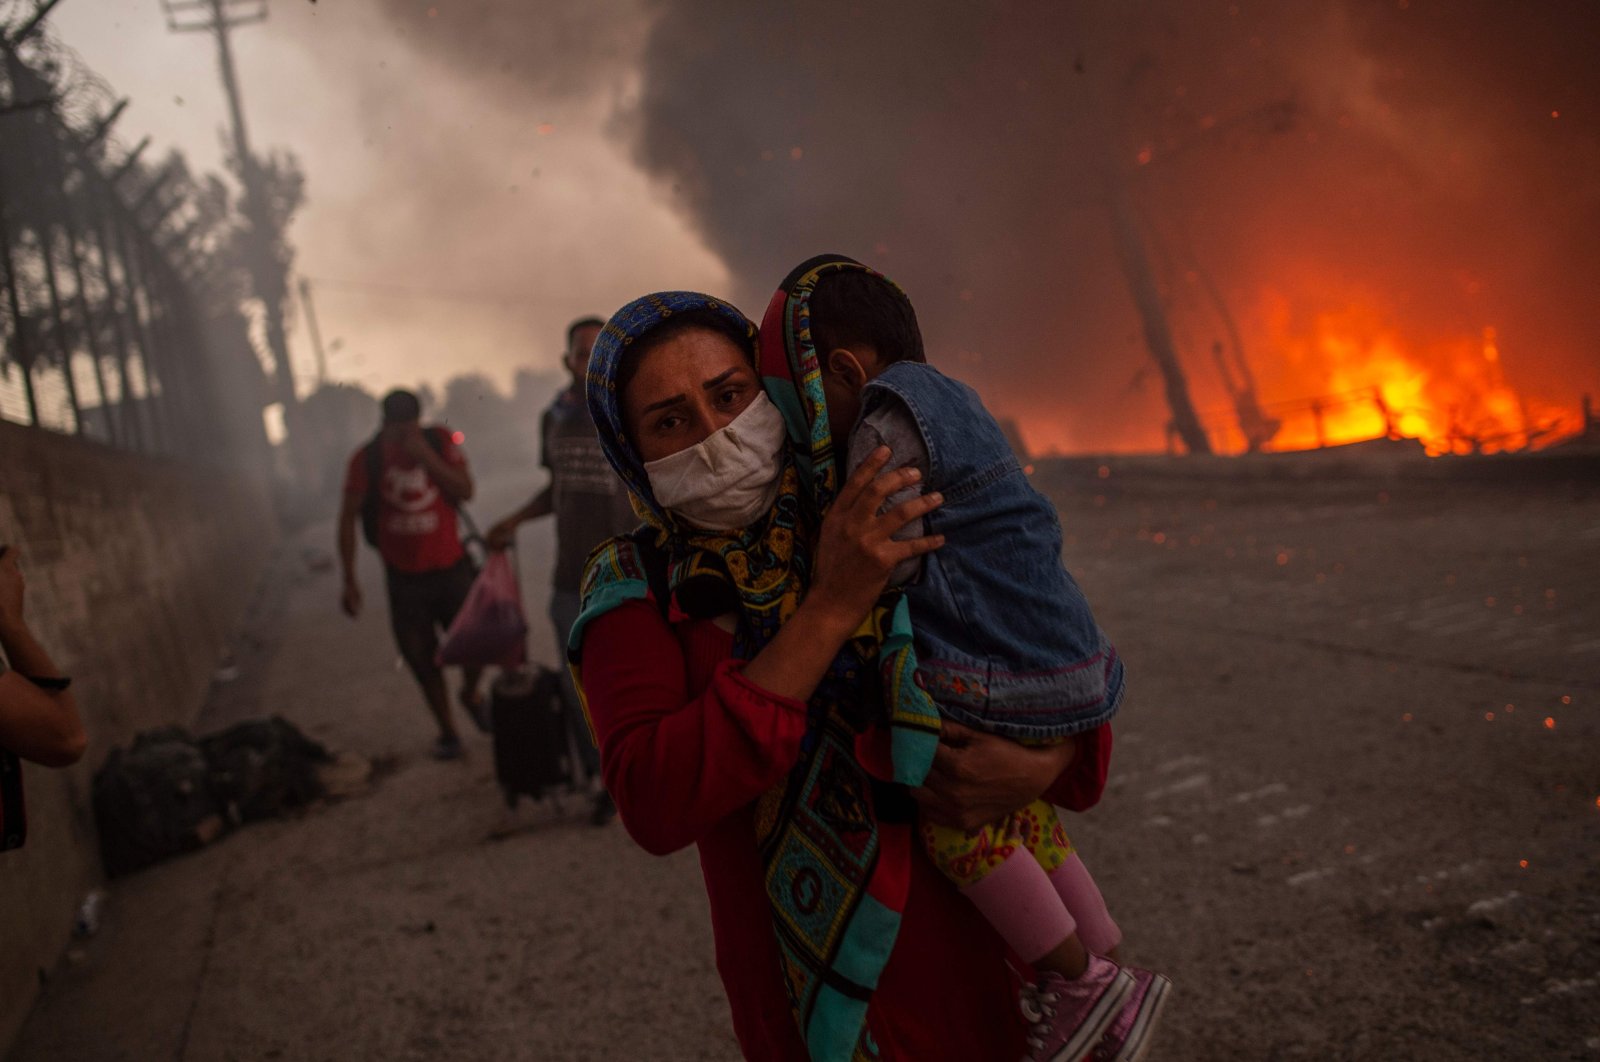 A woman carries a child past flames after a major fire broke out in the Moria migrants camp on the Aegean island of Lesbos, Greece, Sept. 9, 2020. (AFP Photo)